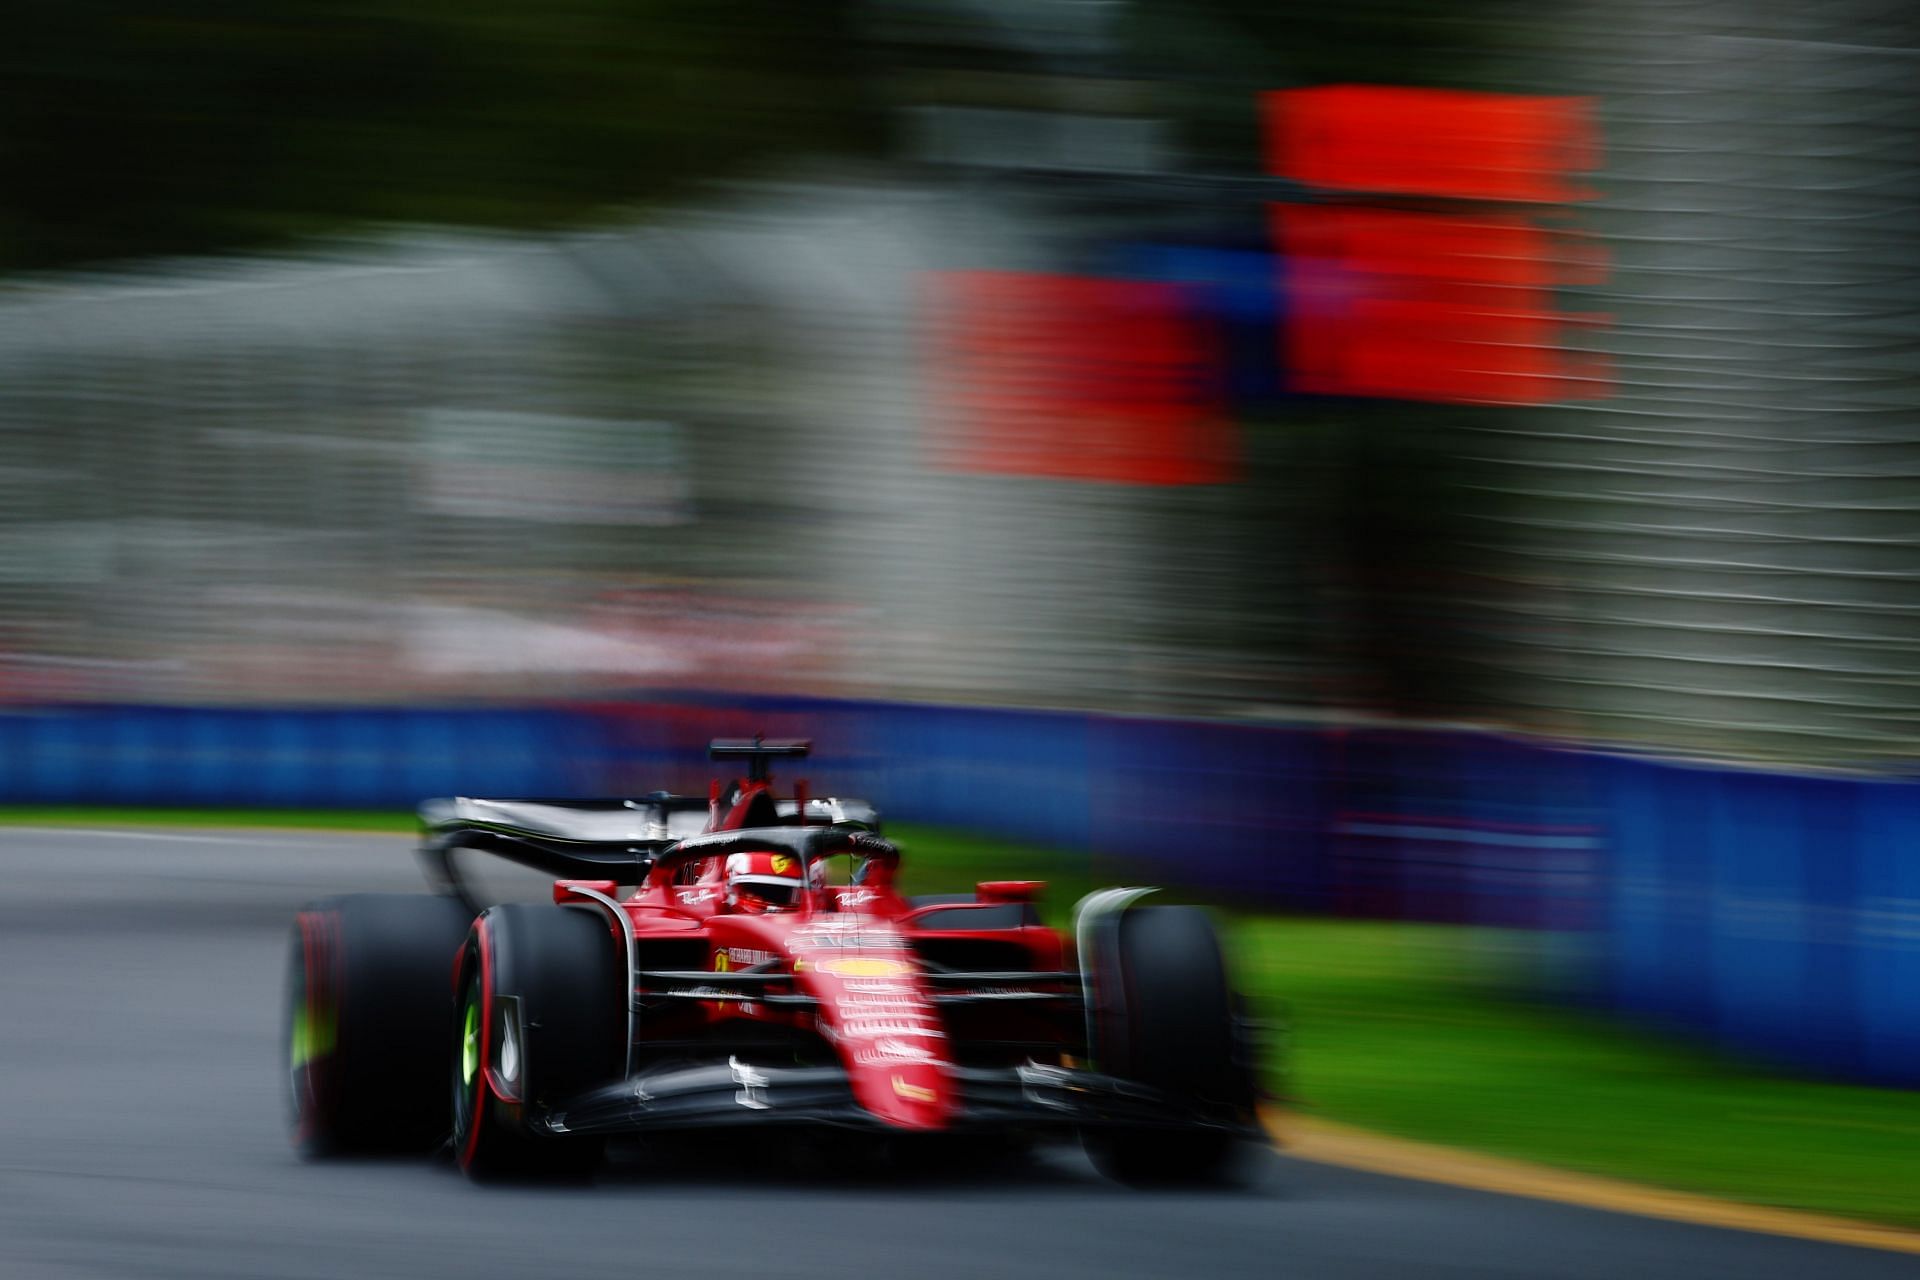 Charles Leclerc claimed his second pole position of the season at the 2022 F1 Australian GP (Photo by Mark Thompson/Getty Images)